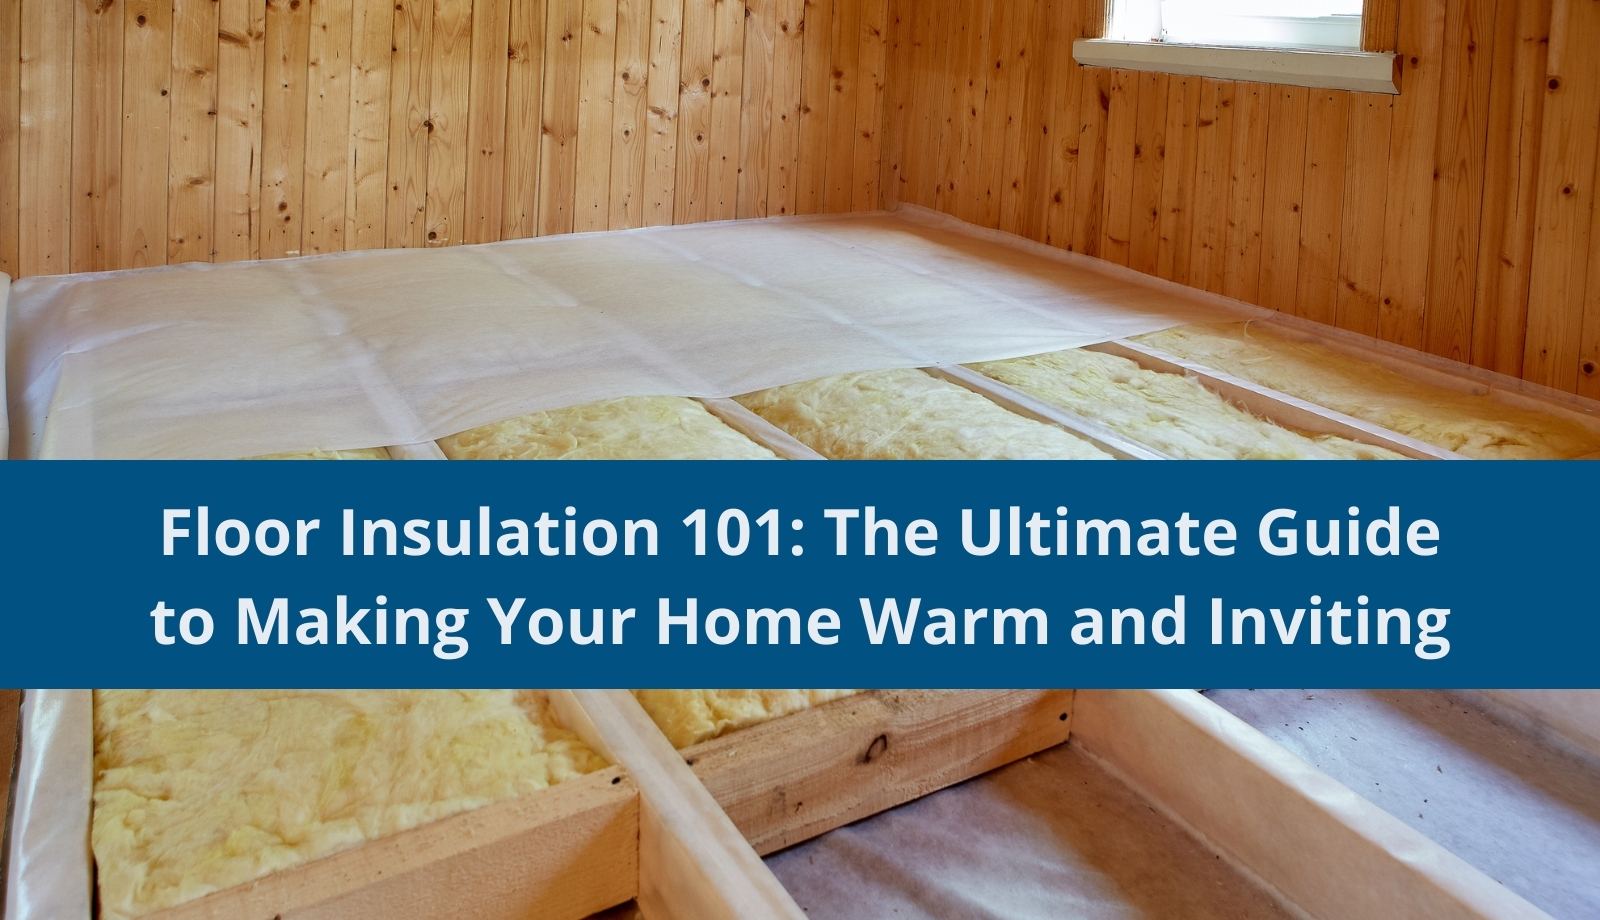 How to Insulate a Deck Floor